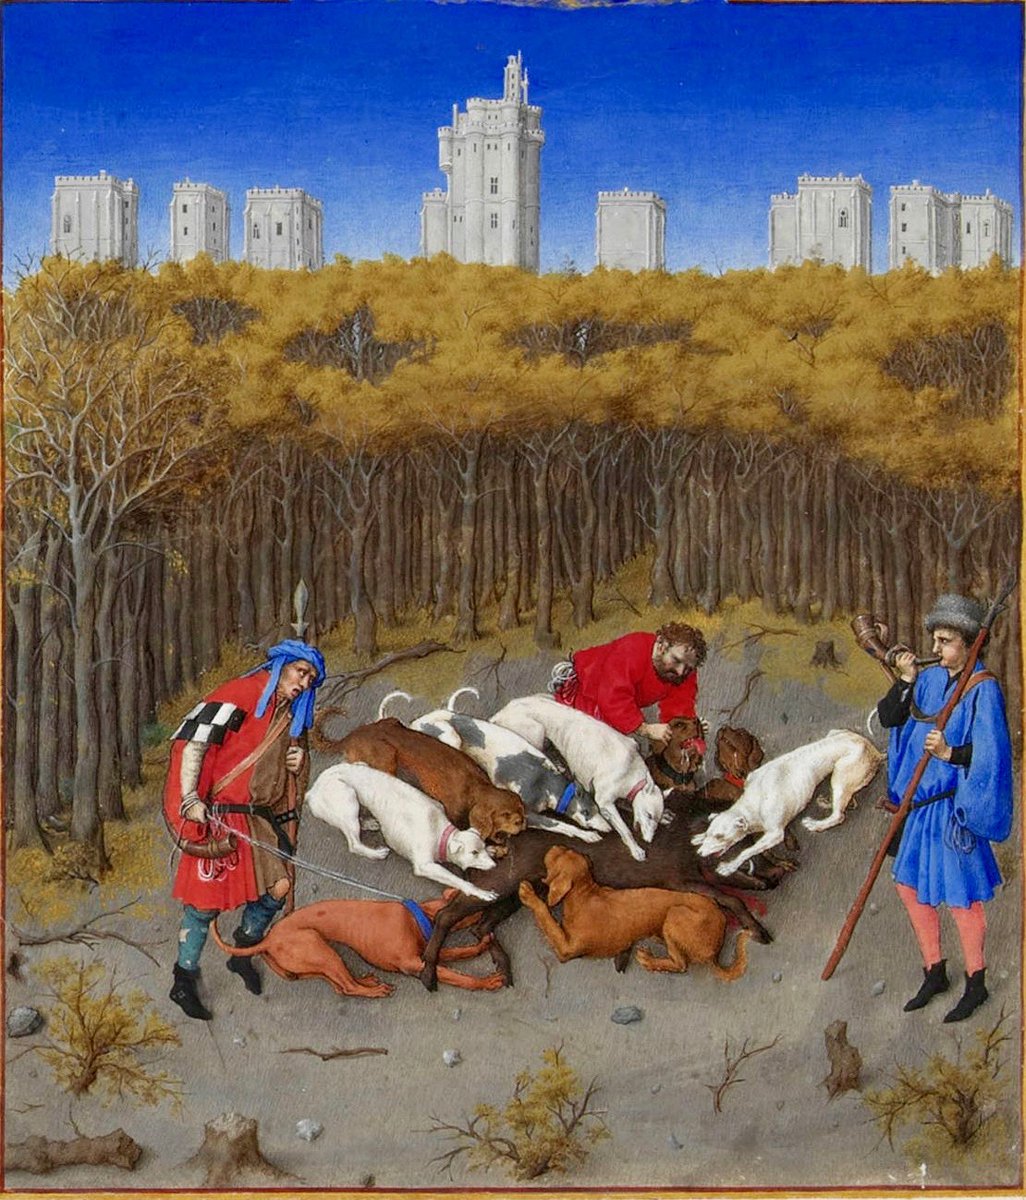 Replacing the slaughter of a pig traditional to Christmas iconography with the climax of a #boarhunt, the keep and towers of the #ChâteaudeVincennes, completed under Charles V (and the birthplace of the #DucdeBerry. #LimbourgBrothers #BarthélemydEyck